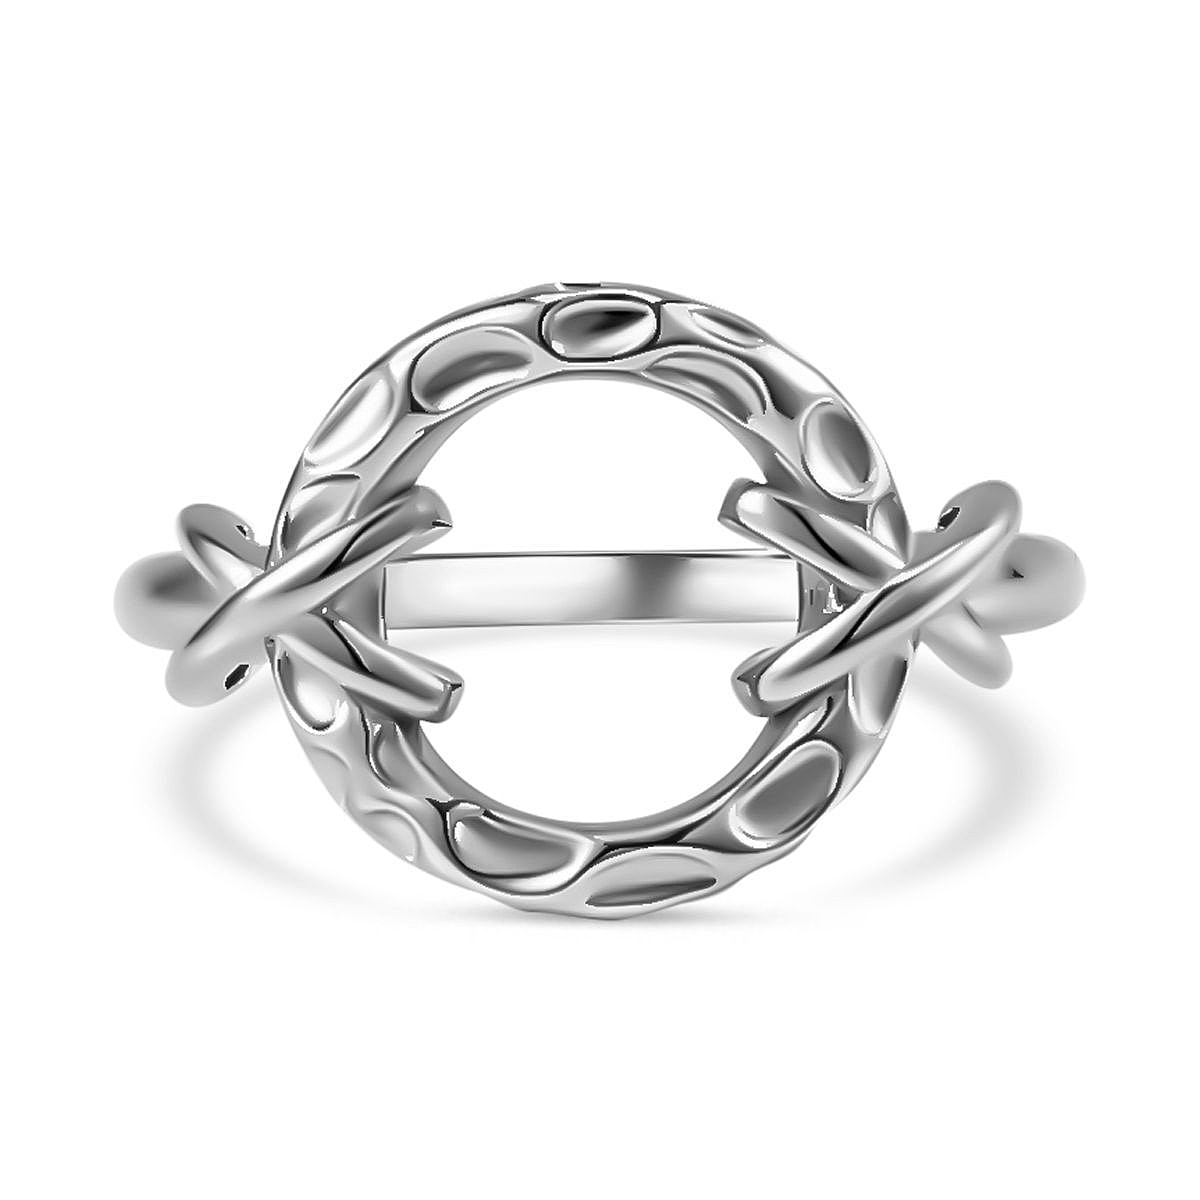 Rachel Galley Kiss Collection - Rhodium Overlay Sterling Silver Ring